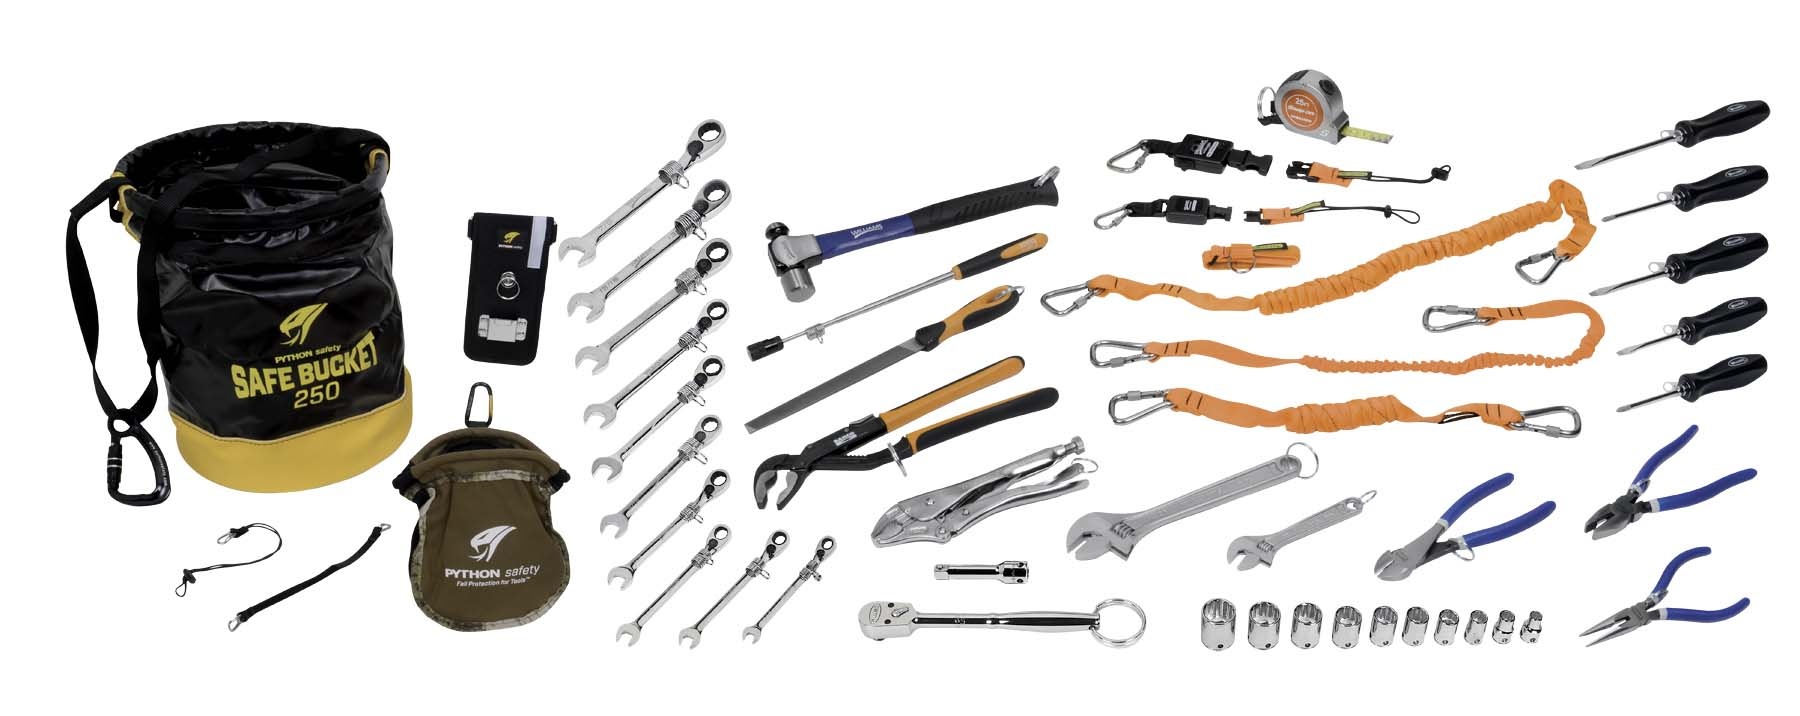 Tools@Height 45 Piece Starter Set from Columbia Safety